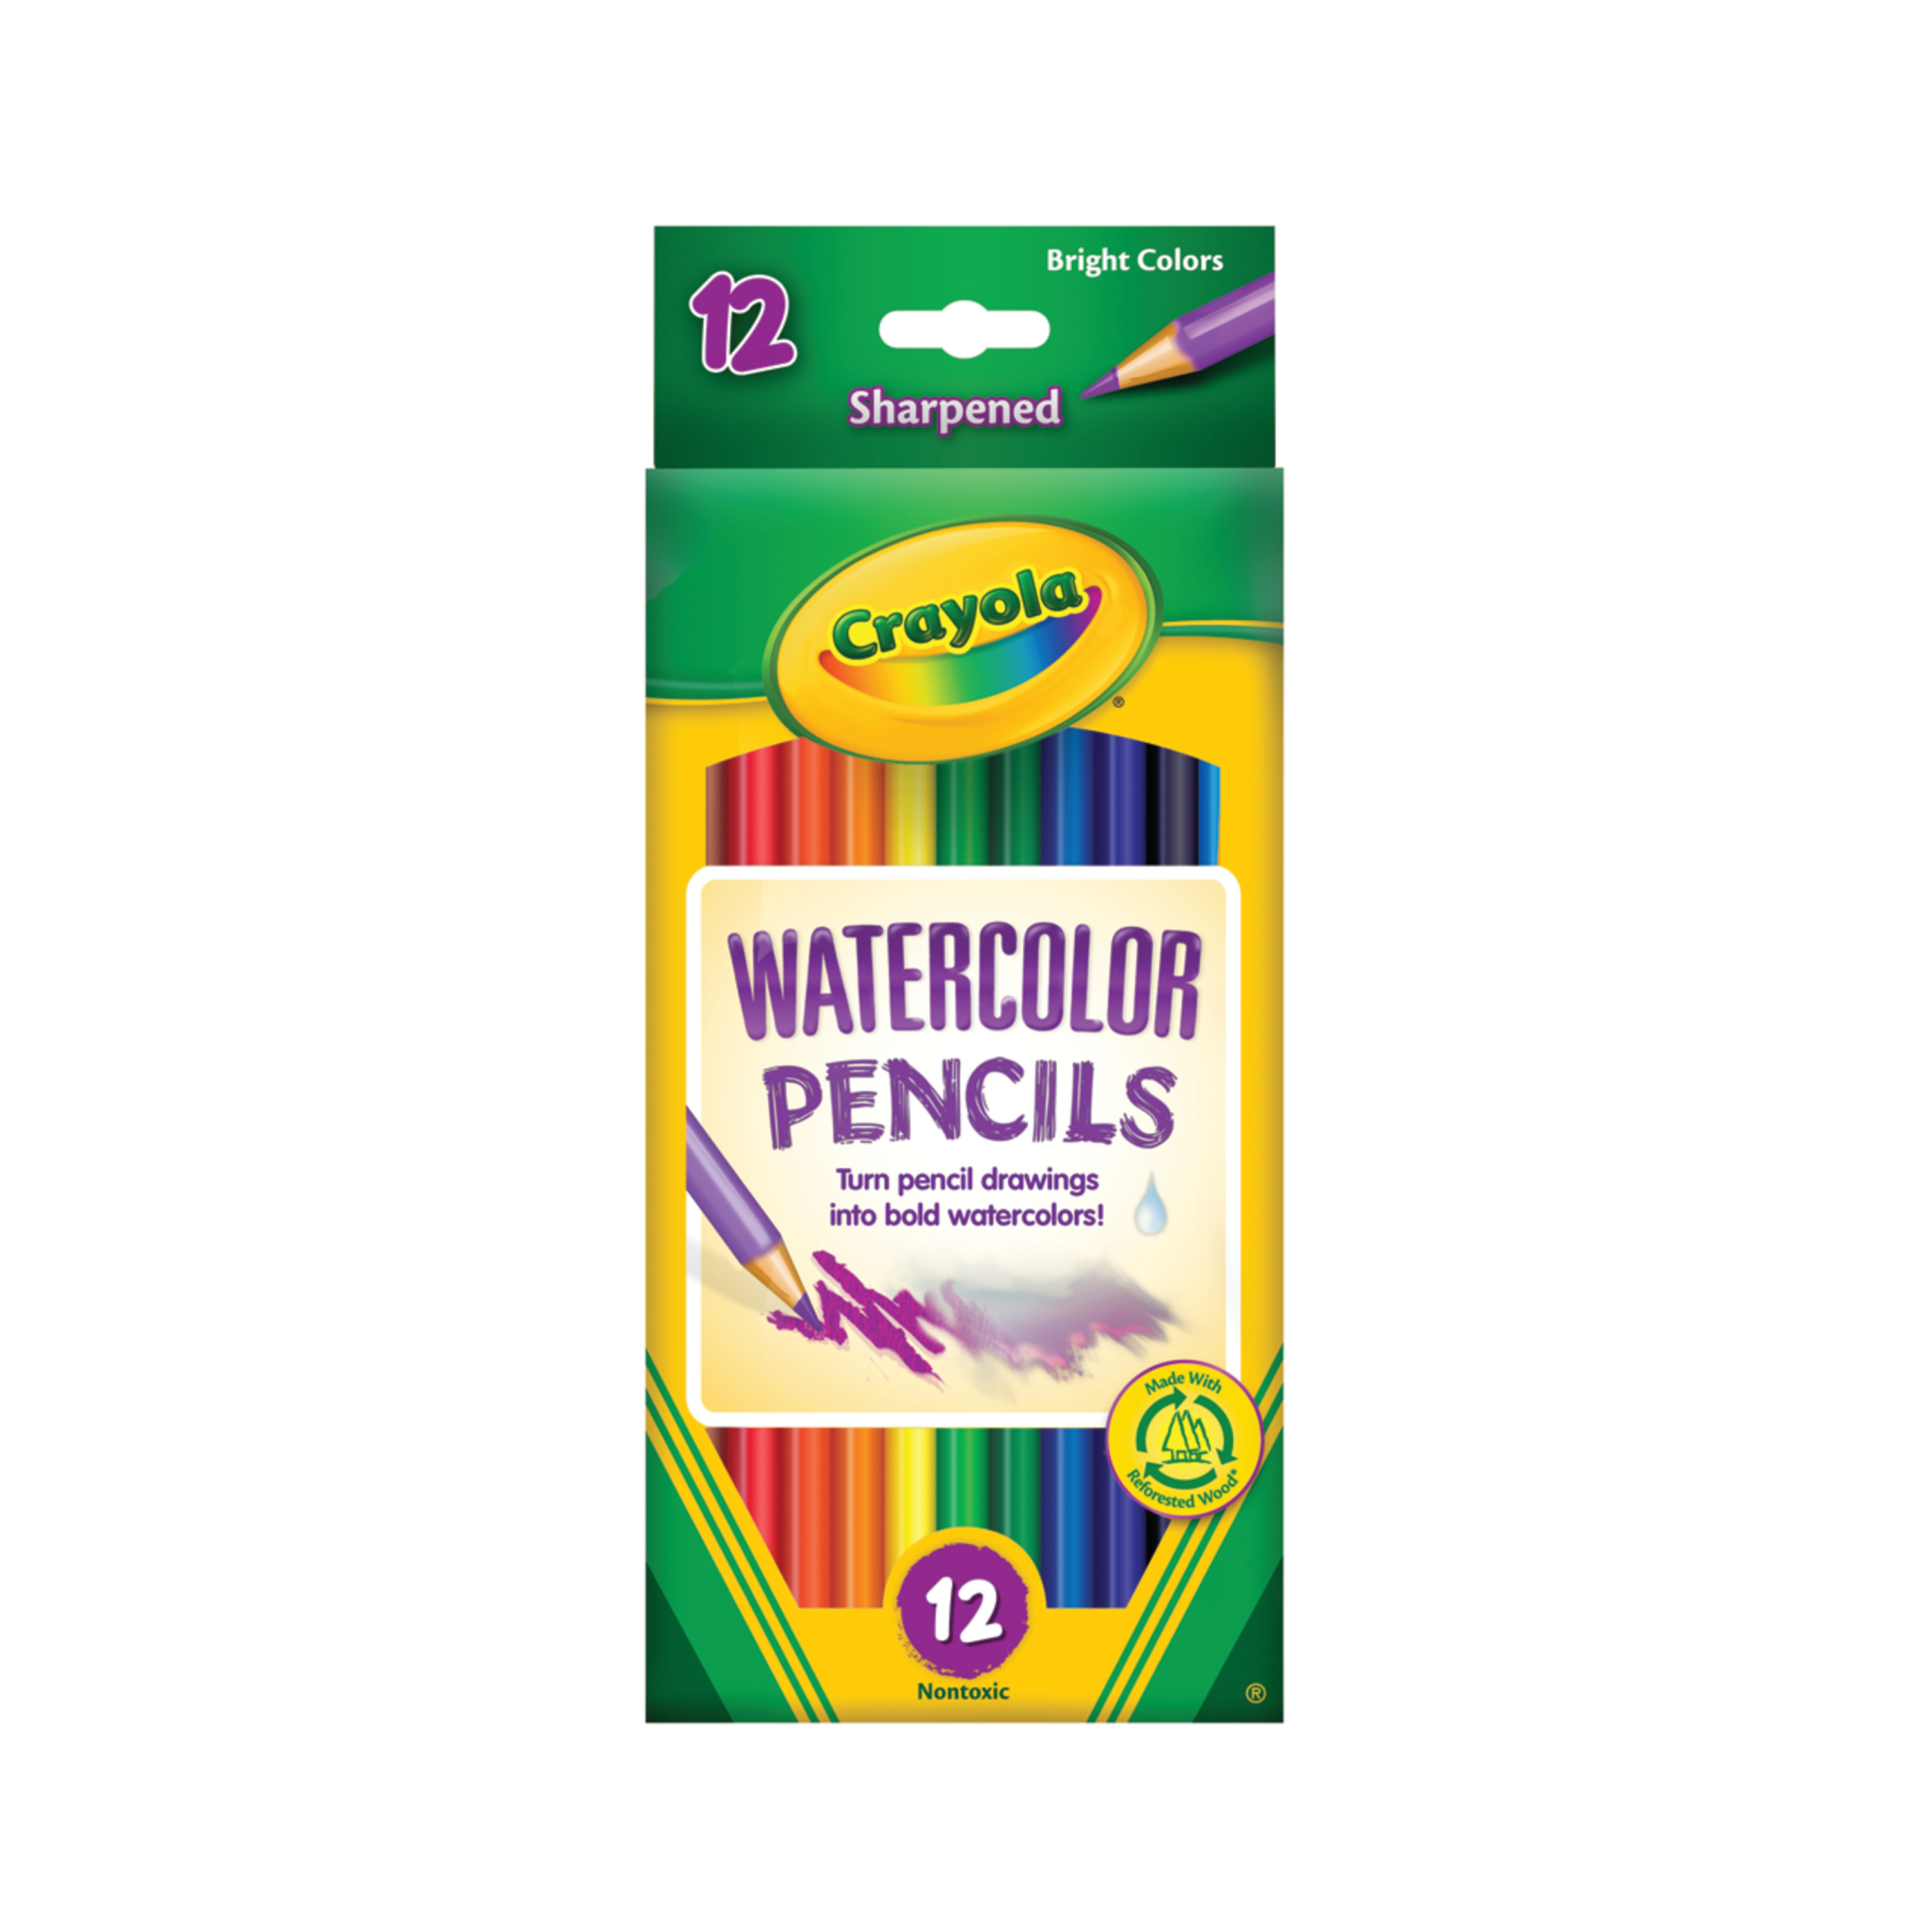 Crayola Watercolor Colored Pencils, 12 Count Use Wet or Dry - image 1 of 10